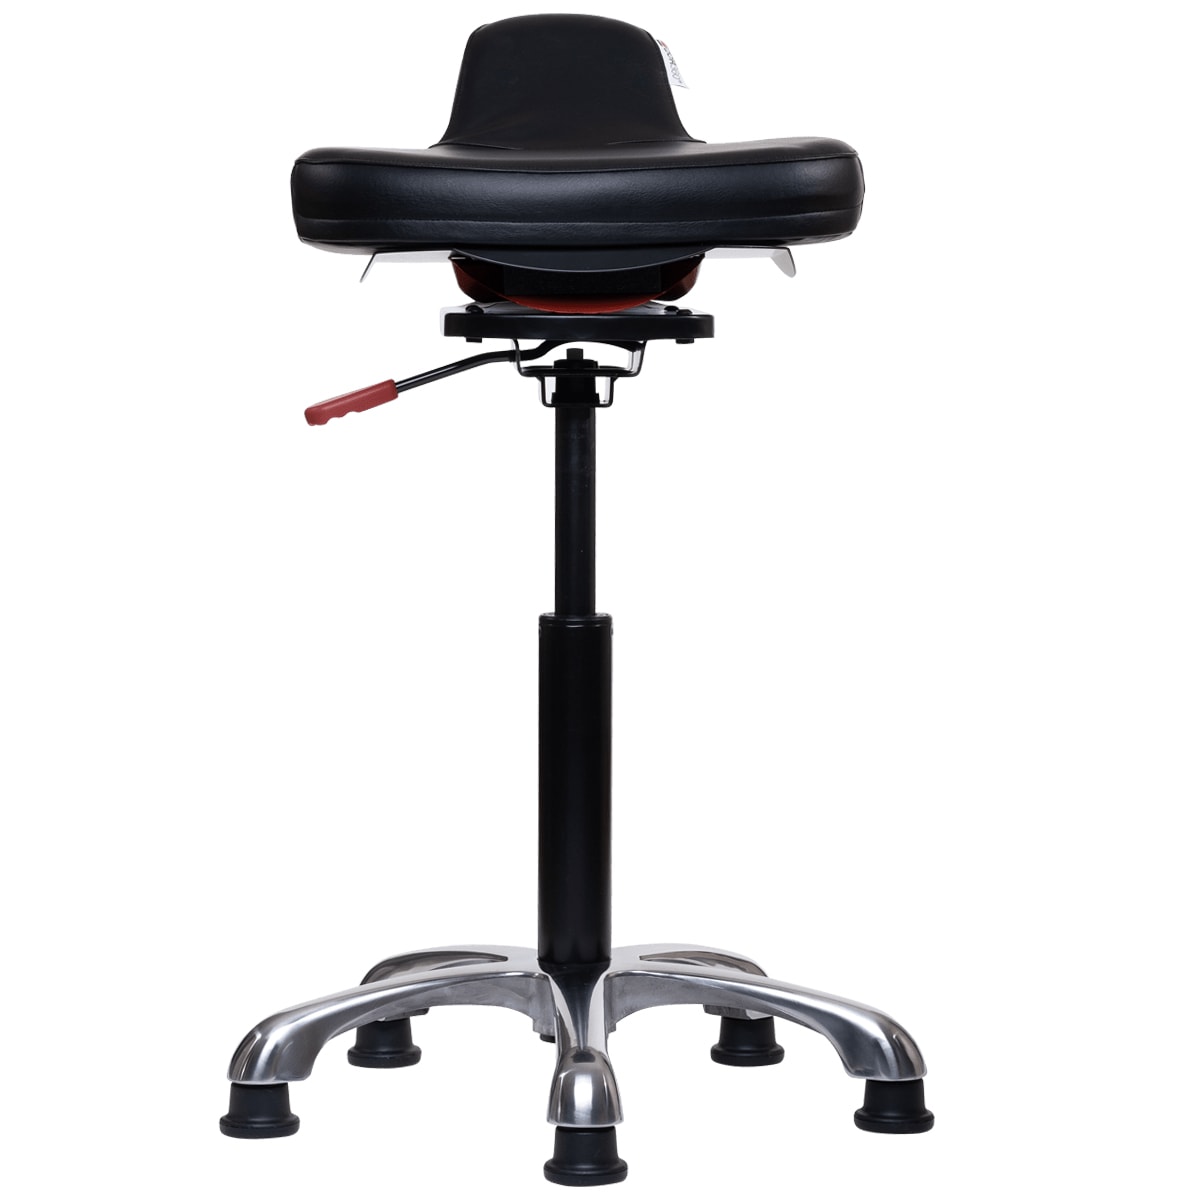 ariel 2.0 active chair pictured in black performance vegan leather